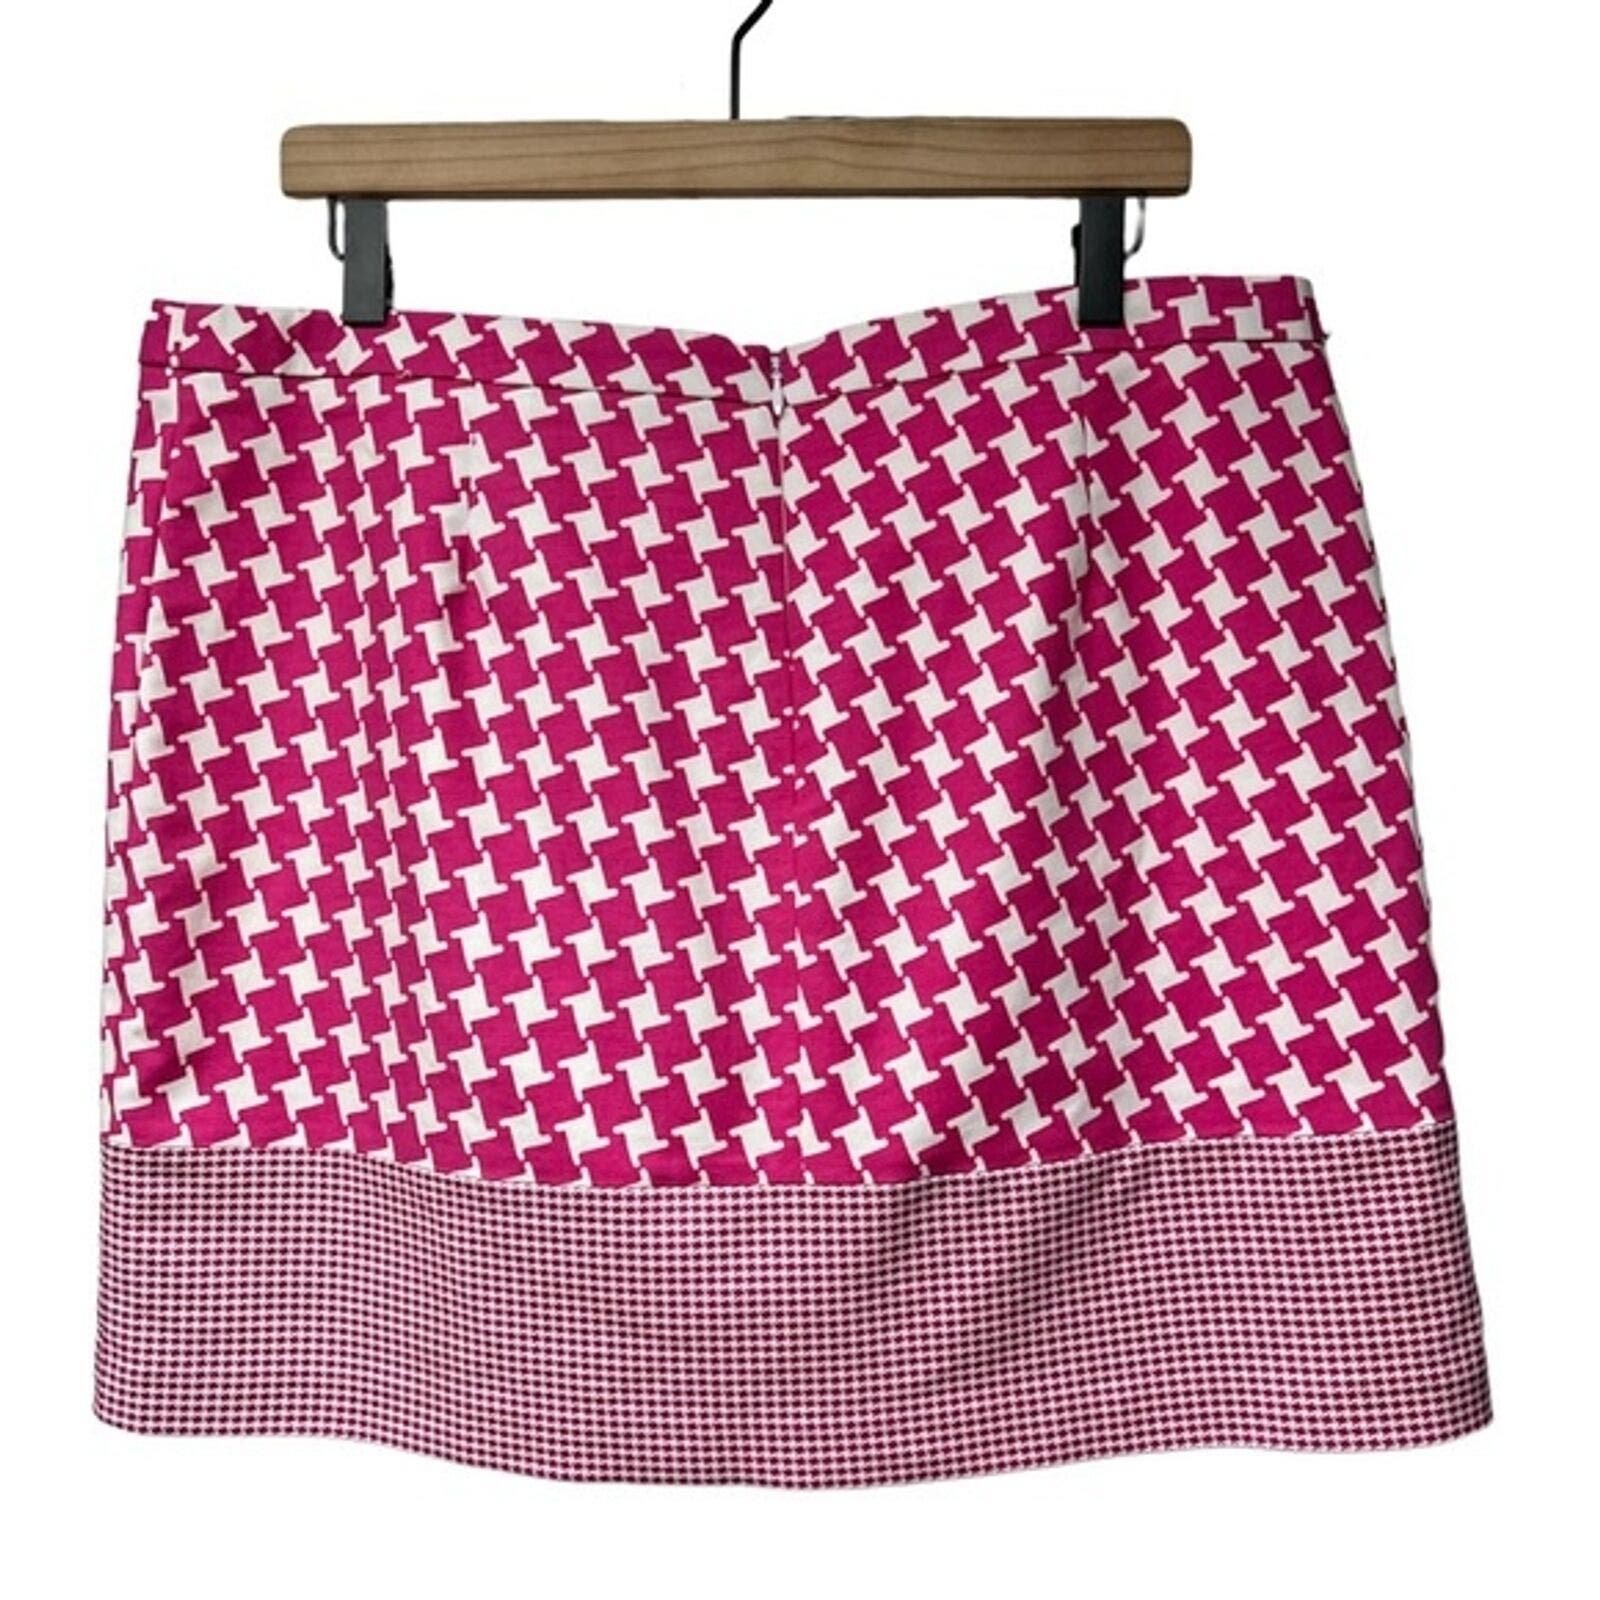 The Best Seller Michael Kors Skirt Pink White Houndstooth Checked Lined Cotton Blend Size 14 oPuu94lyc for sale